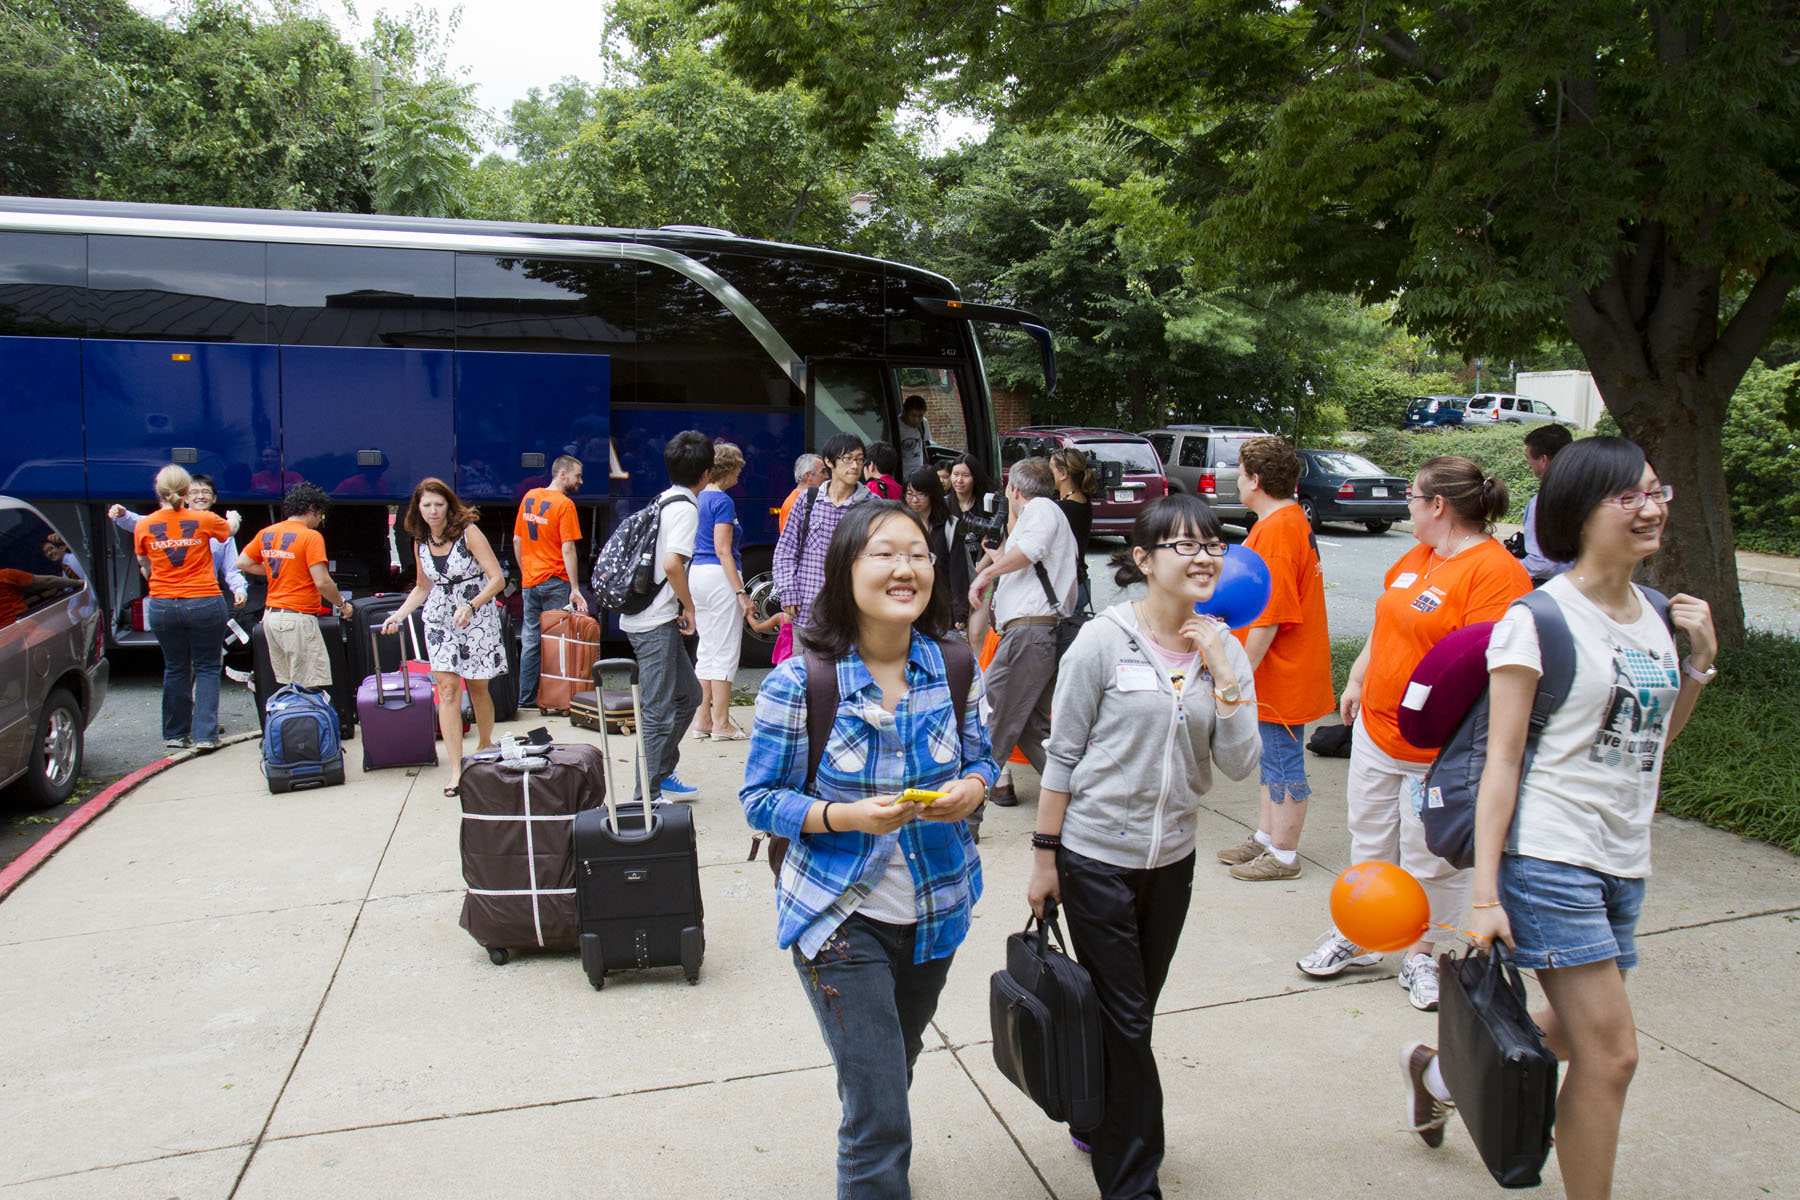 International Students getting off the UVA Express Transport bus with their personal belongings